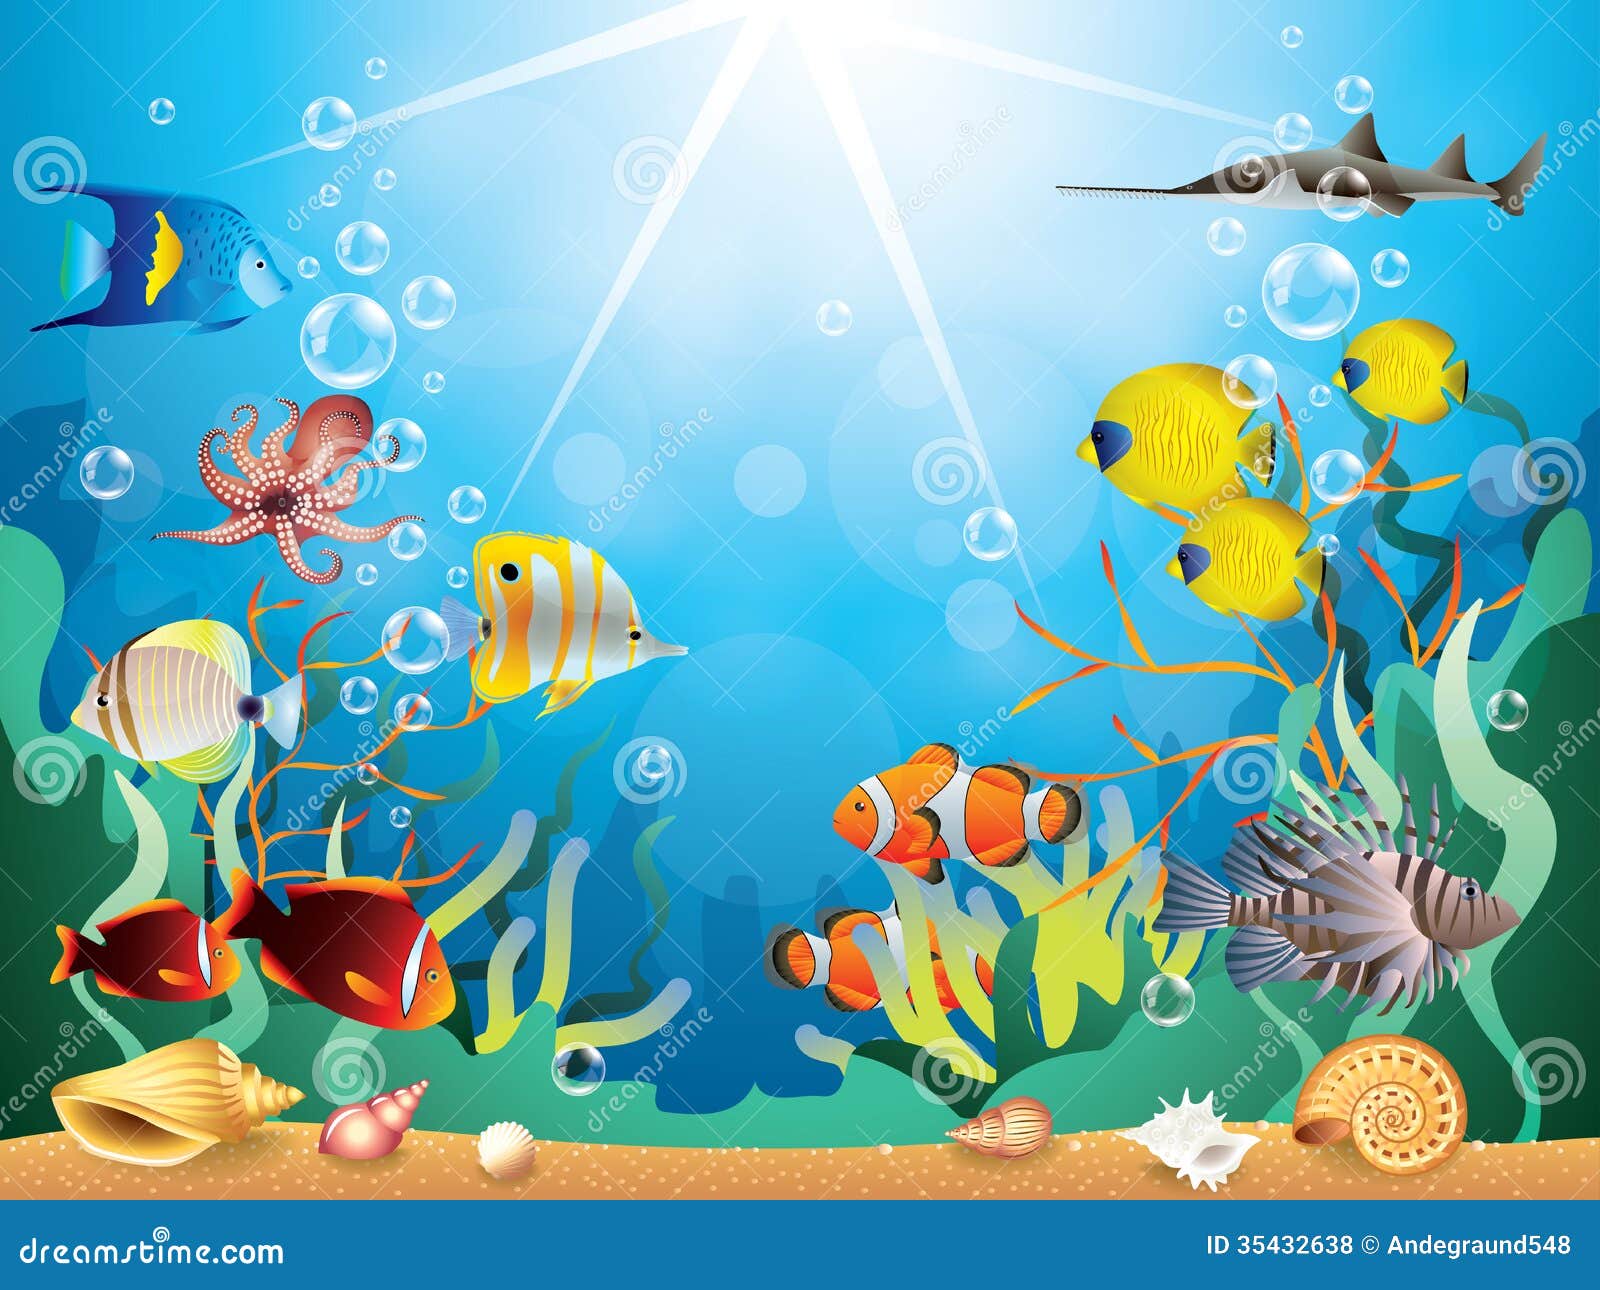 underwater clipart images - photo #44